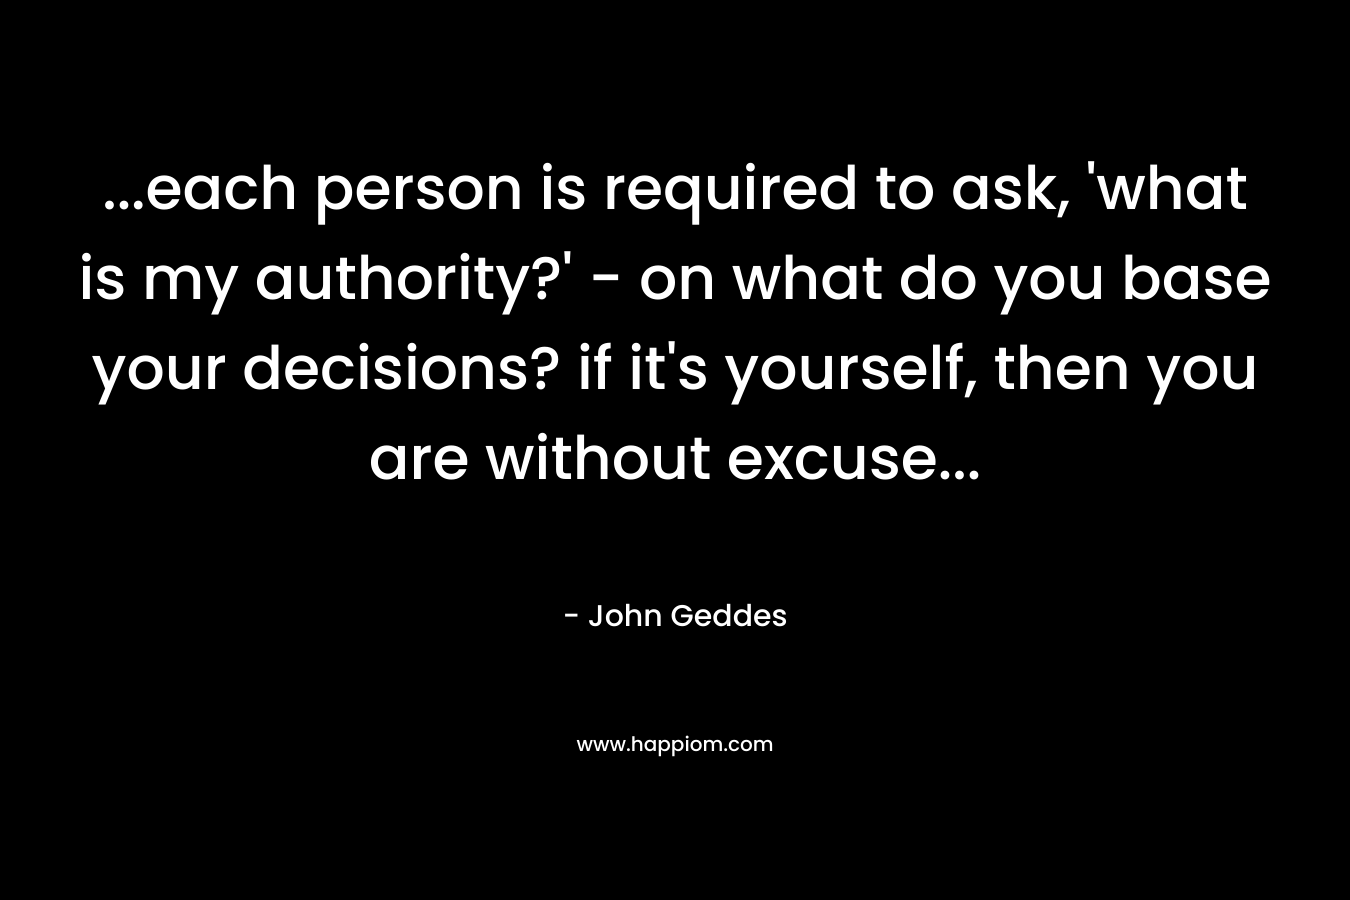 …each person is required to ask, ‘what is my authority?’ – on what do you base your decisions? if it’s yourself, then you are without excuse… – John Geddes